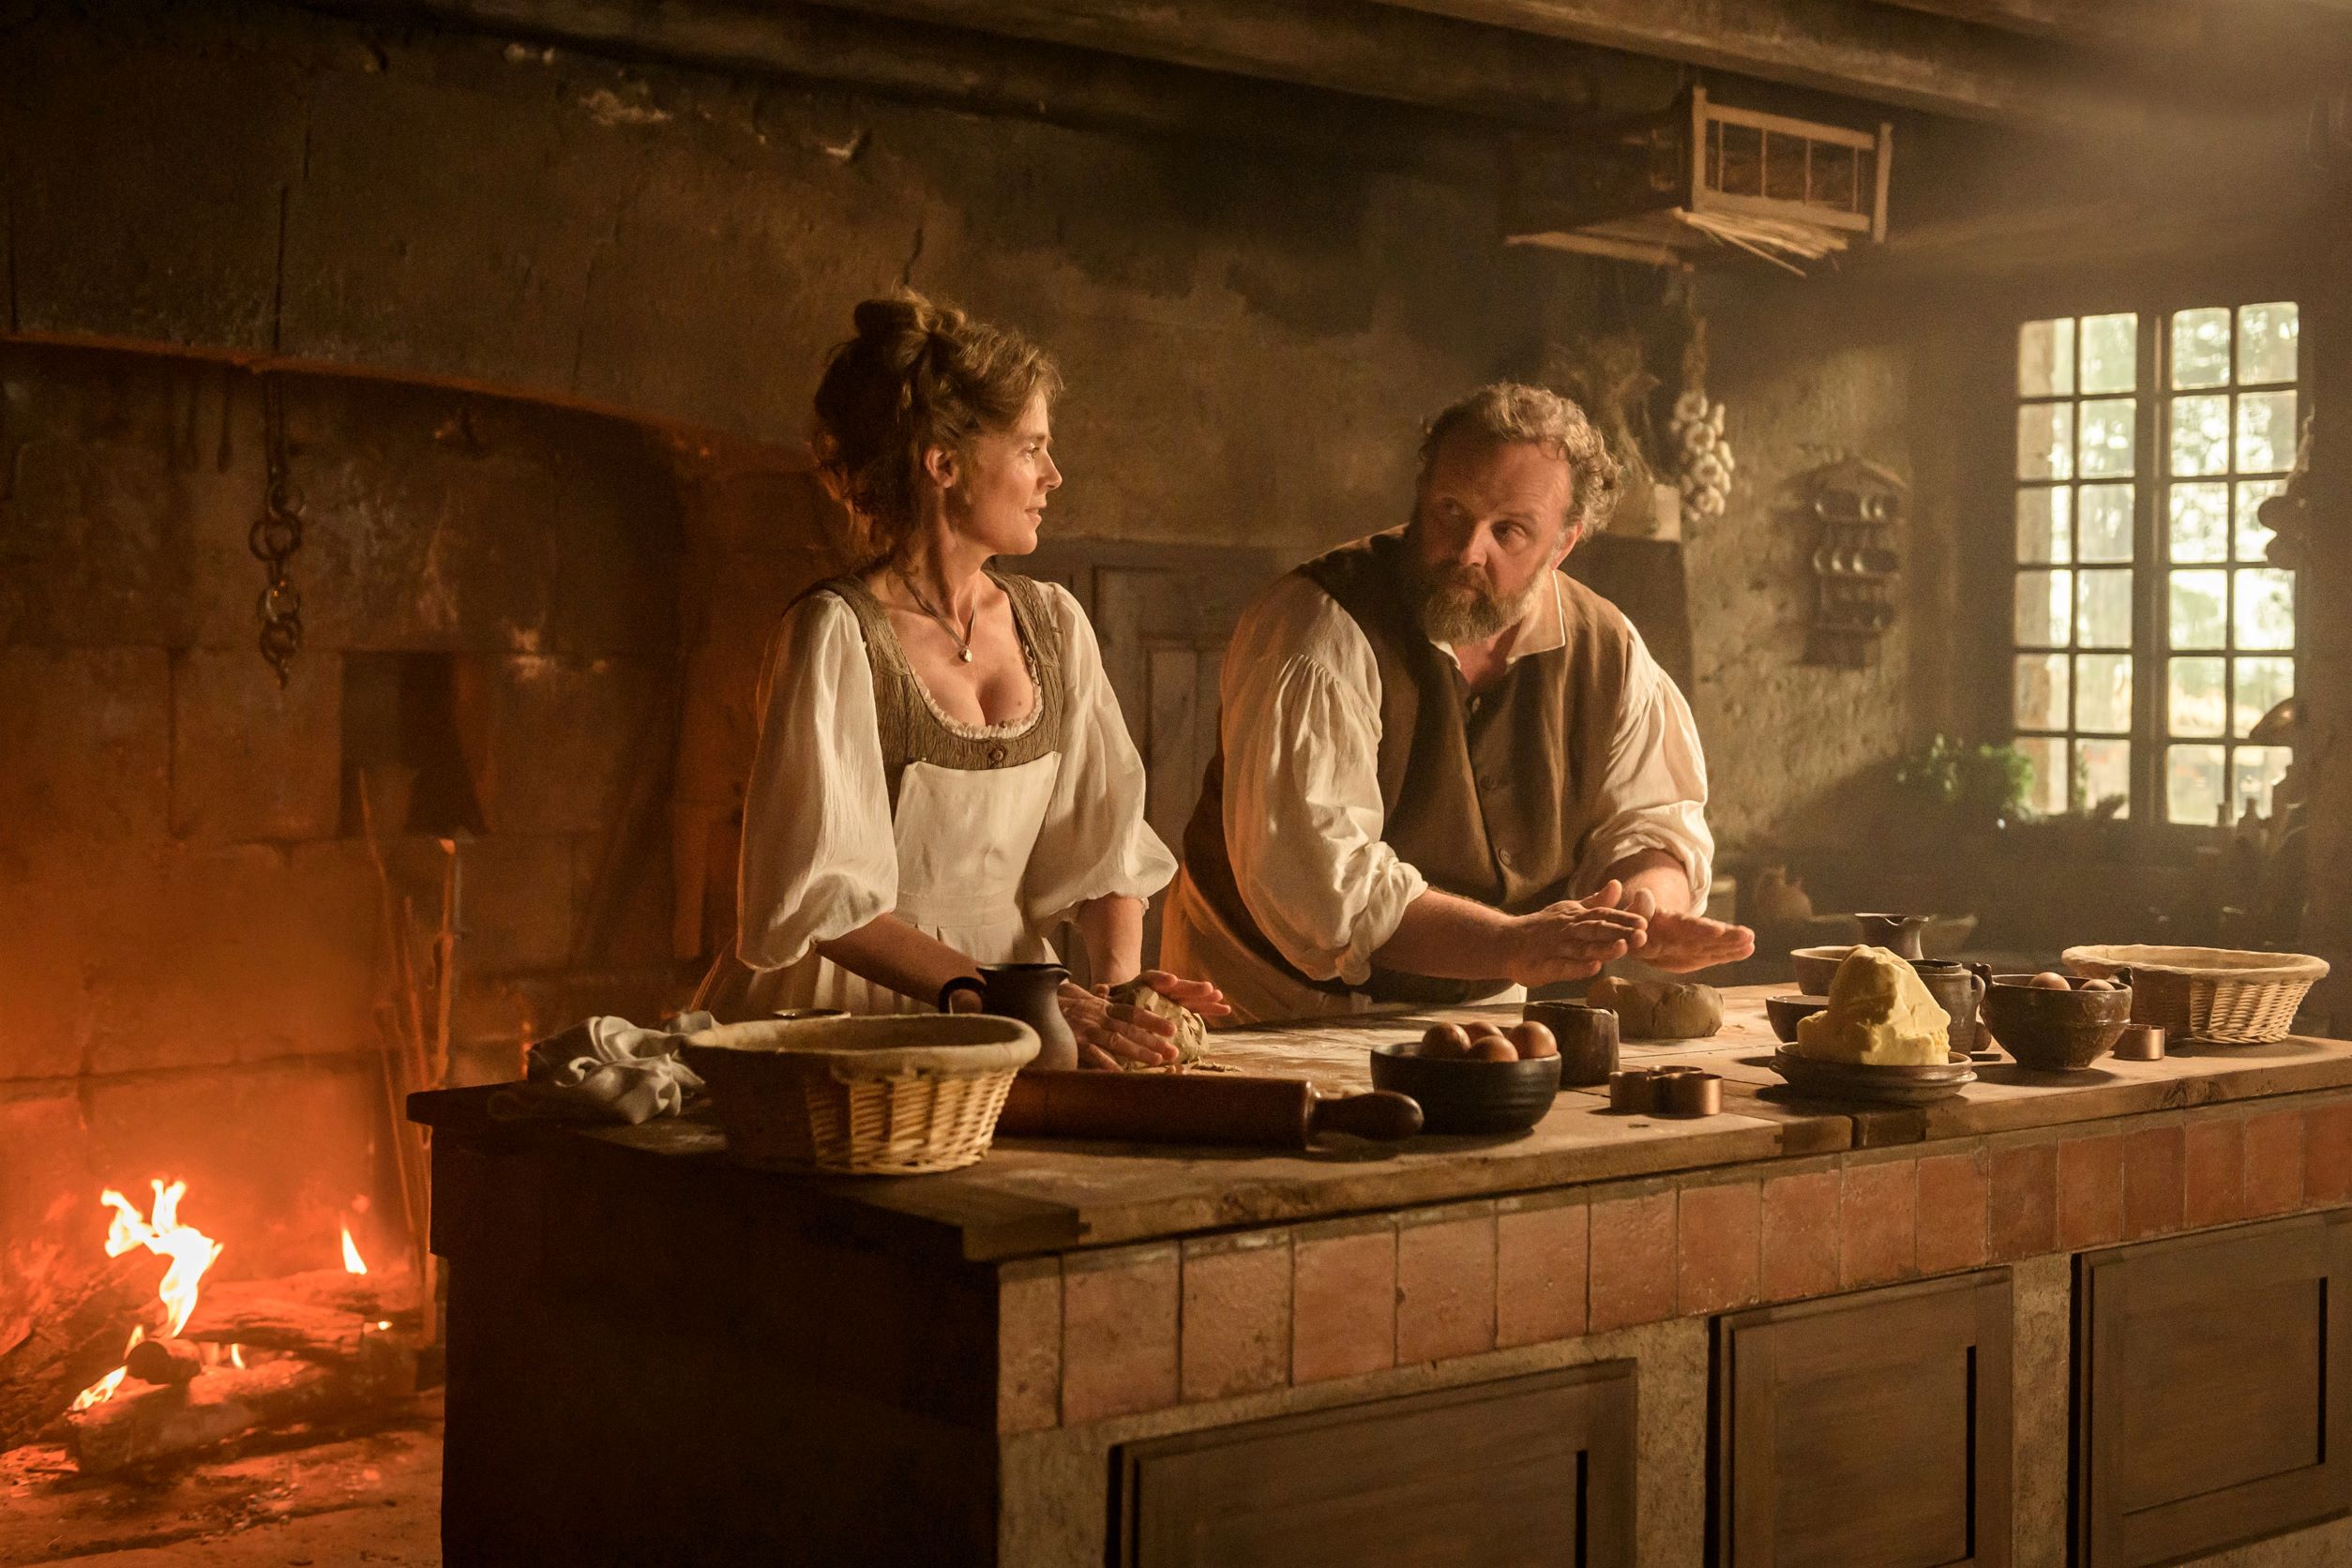 Isabelle Carré and Grégory Gadebois bake bread in the French film Delicieux